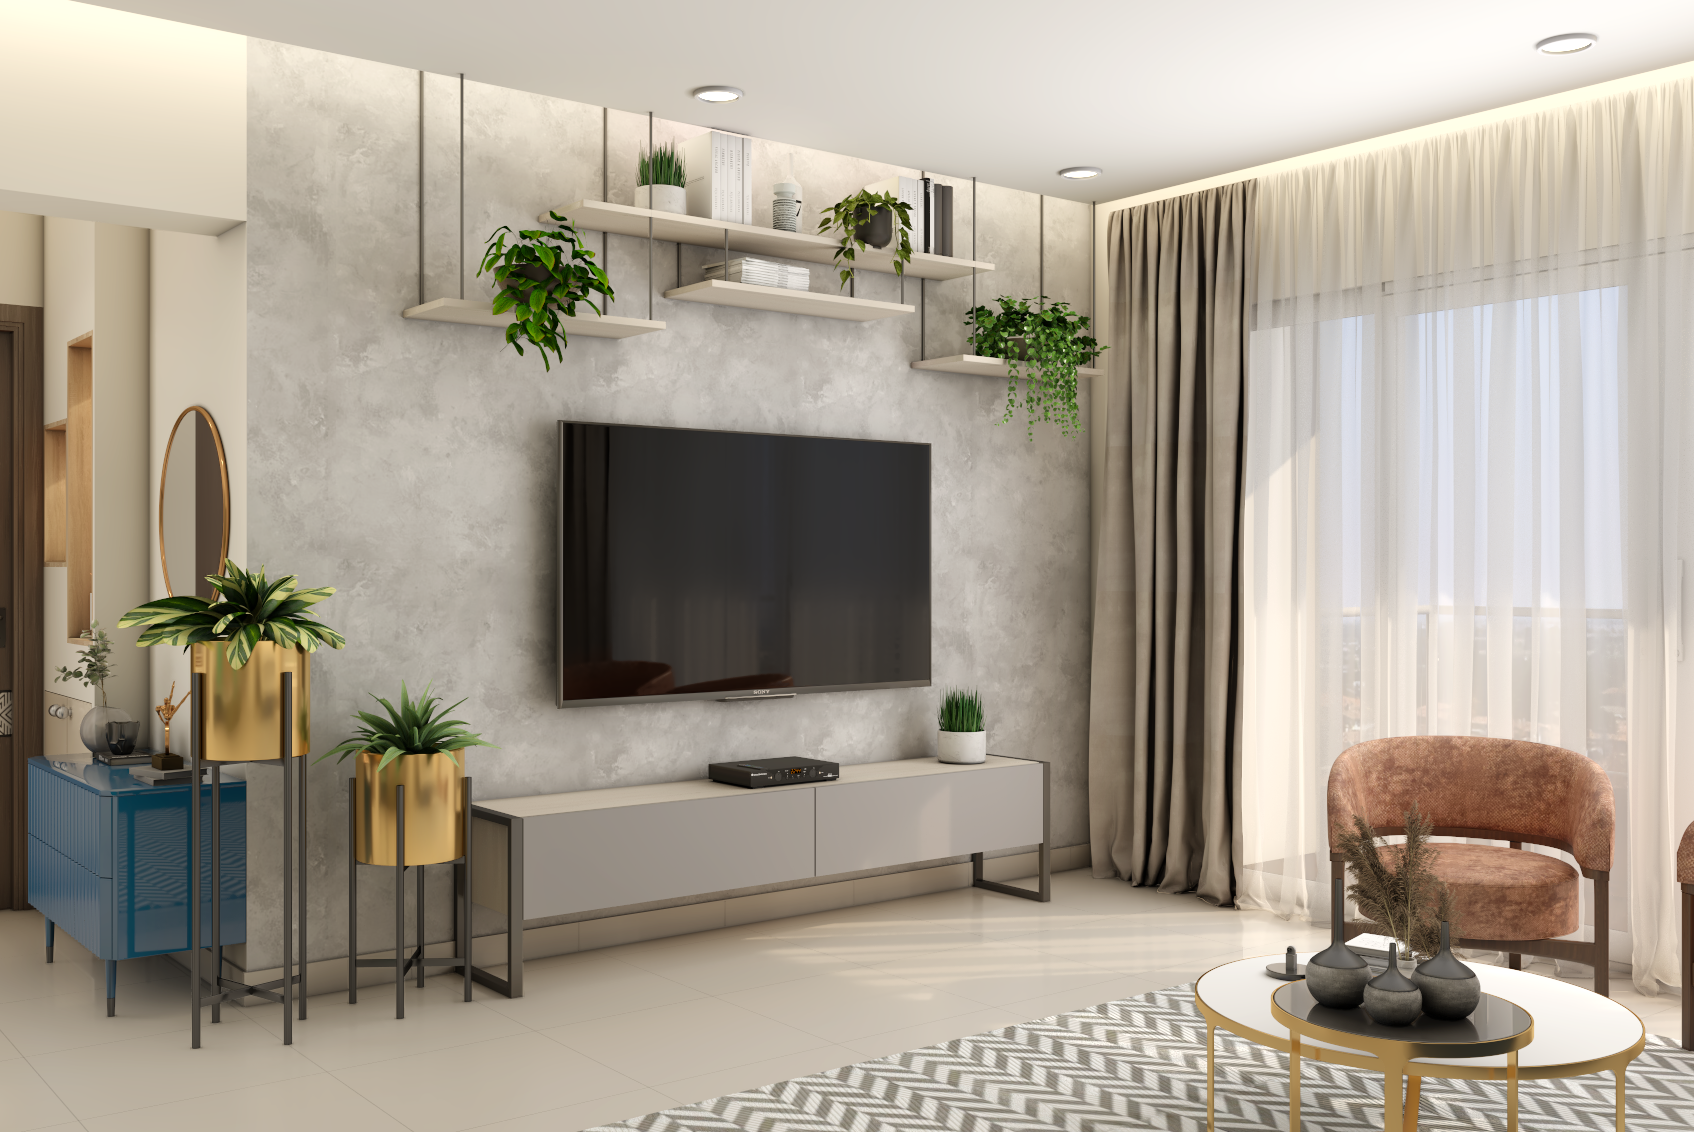 Modern TV Unit Design With Grey Console Unit And Hanging Plants